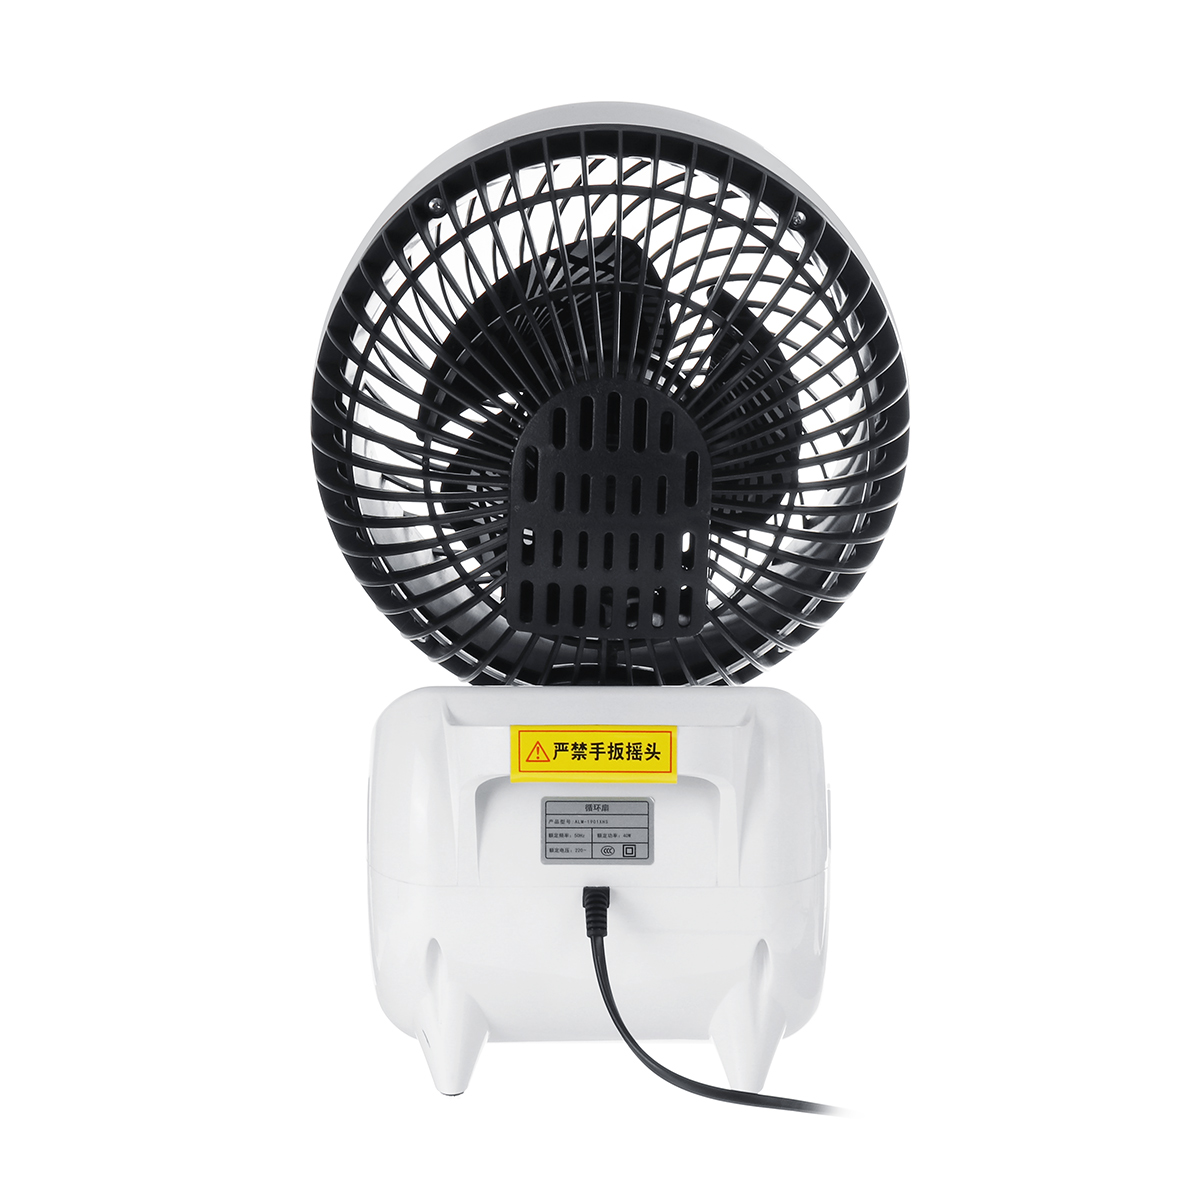 220V-40W-3-Speed-Portable-Air-Circulator-Cooling-Fan-USB-Charging-Cooler-Home-Room-1535628-10